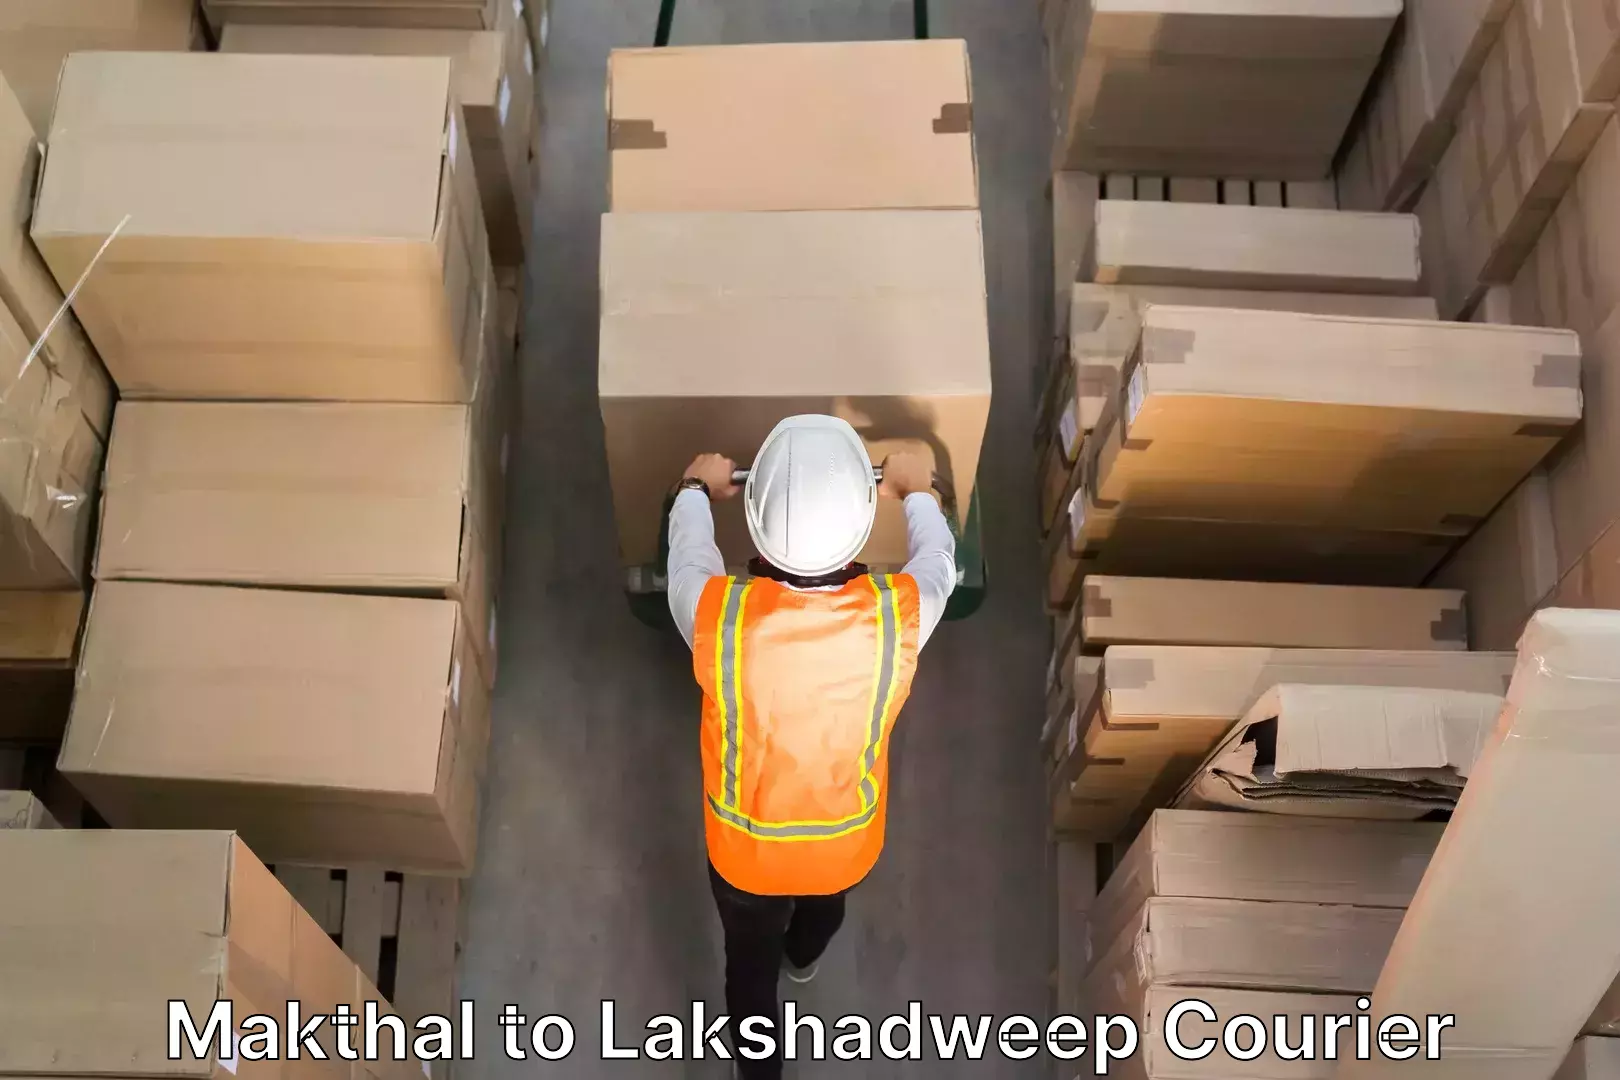 Budget-friendly moving services Makthal to Lakshadweep